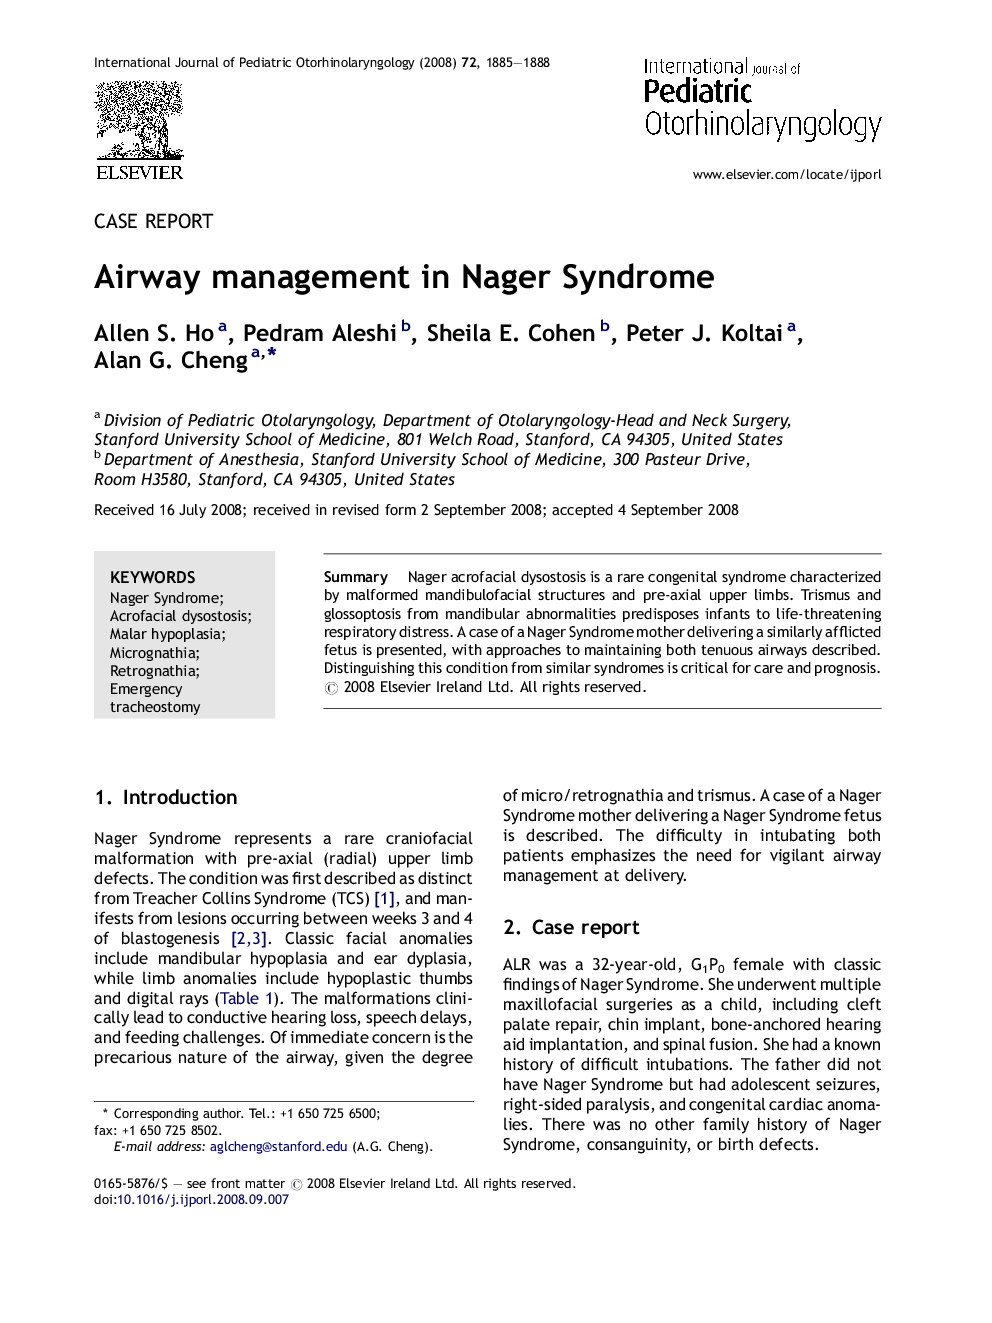 Airway management in Nager Syndrome